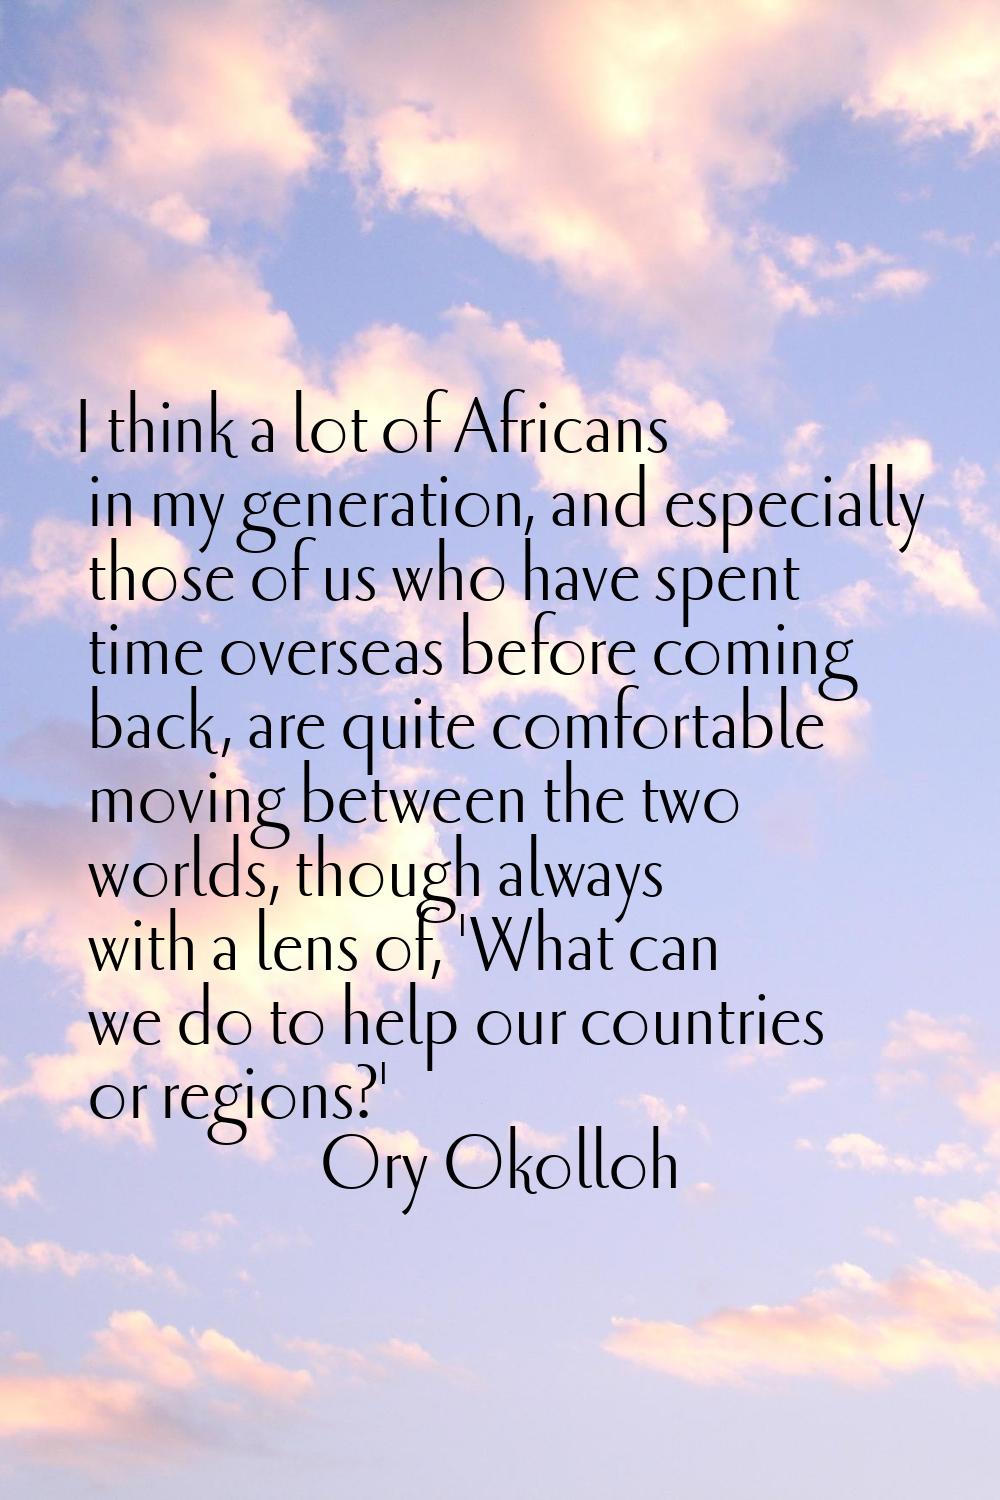 I think a lot of Africans in my generation, and especially those of us who have spent time overseas